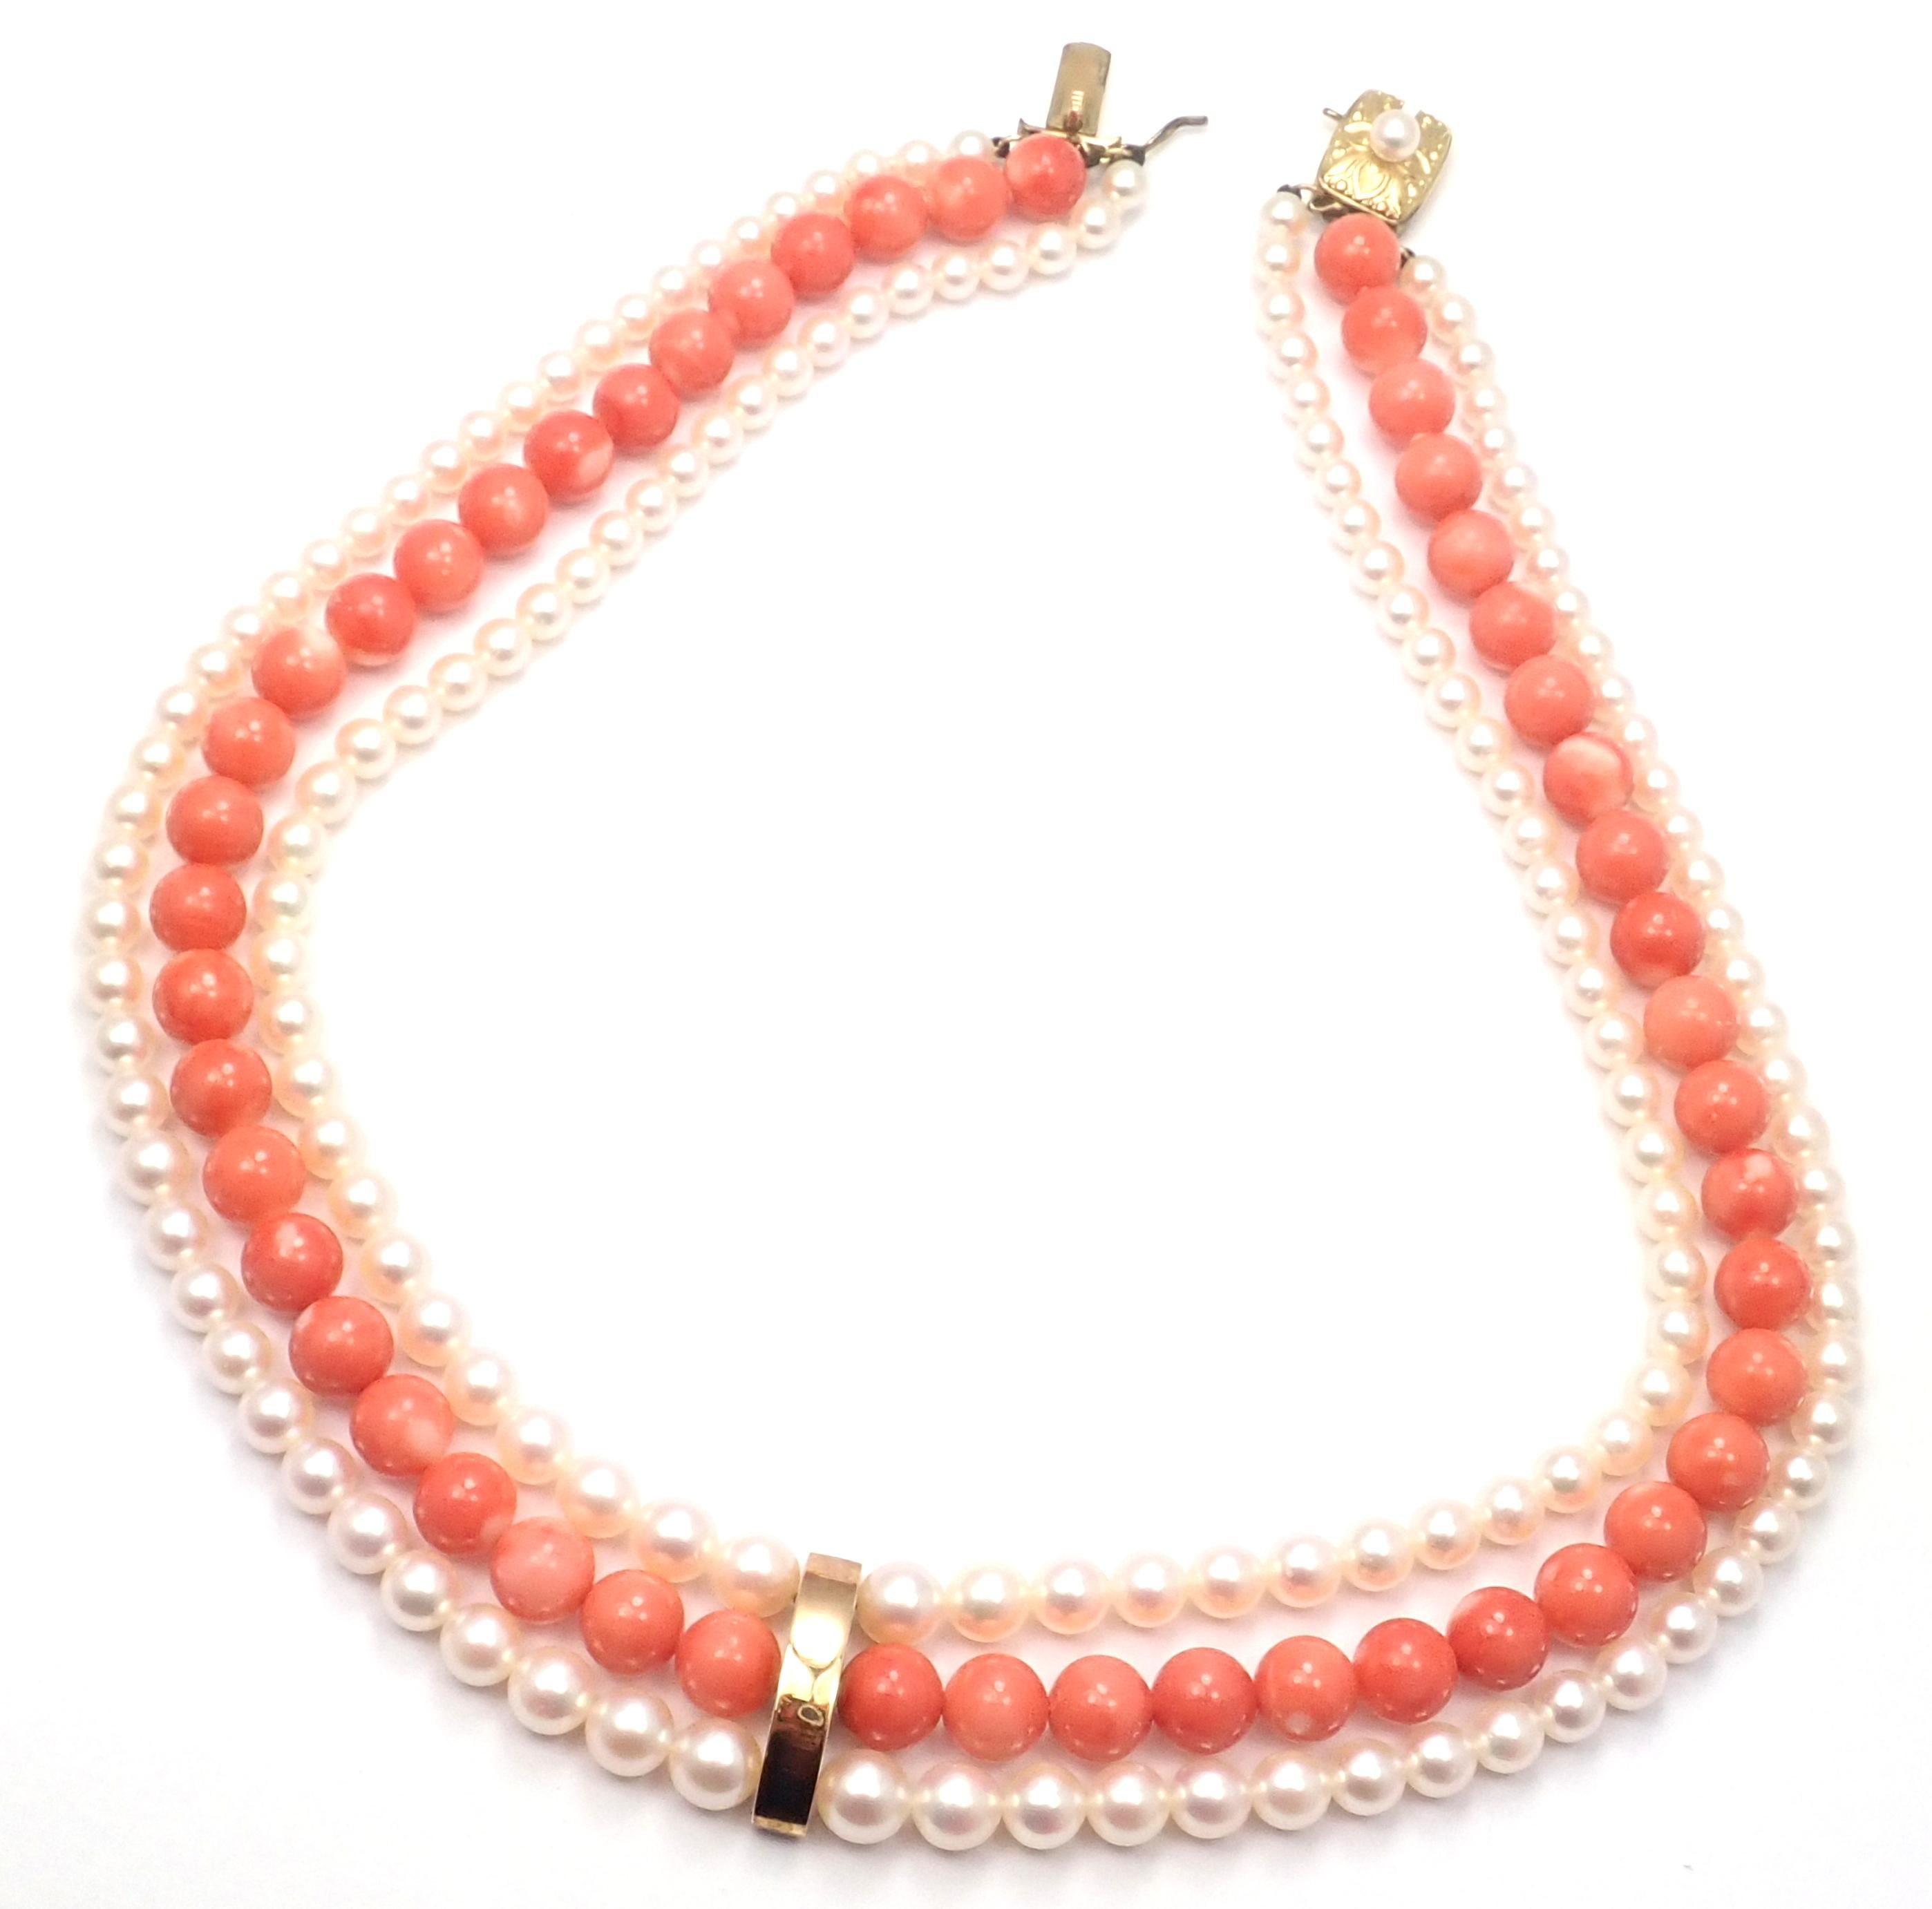 14k Yellow Gold Triple Stand Coral Pearl Bead Vintage Necklace by Mikimoto.
With 2 stands of pearls from 6mm to 4mm
1 strand of coral beads 7.5mm each
Details:
Measurements: 
Necklace Length: 15